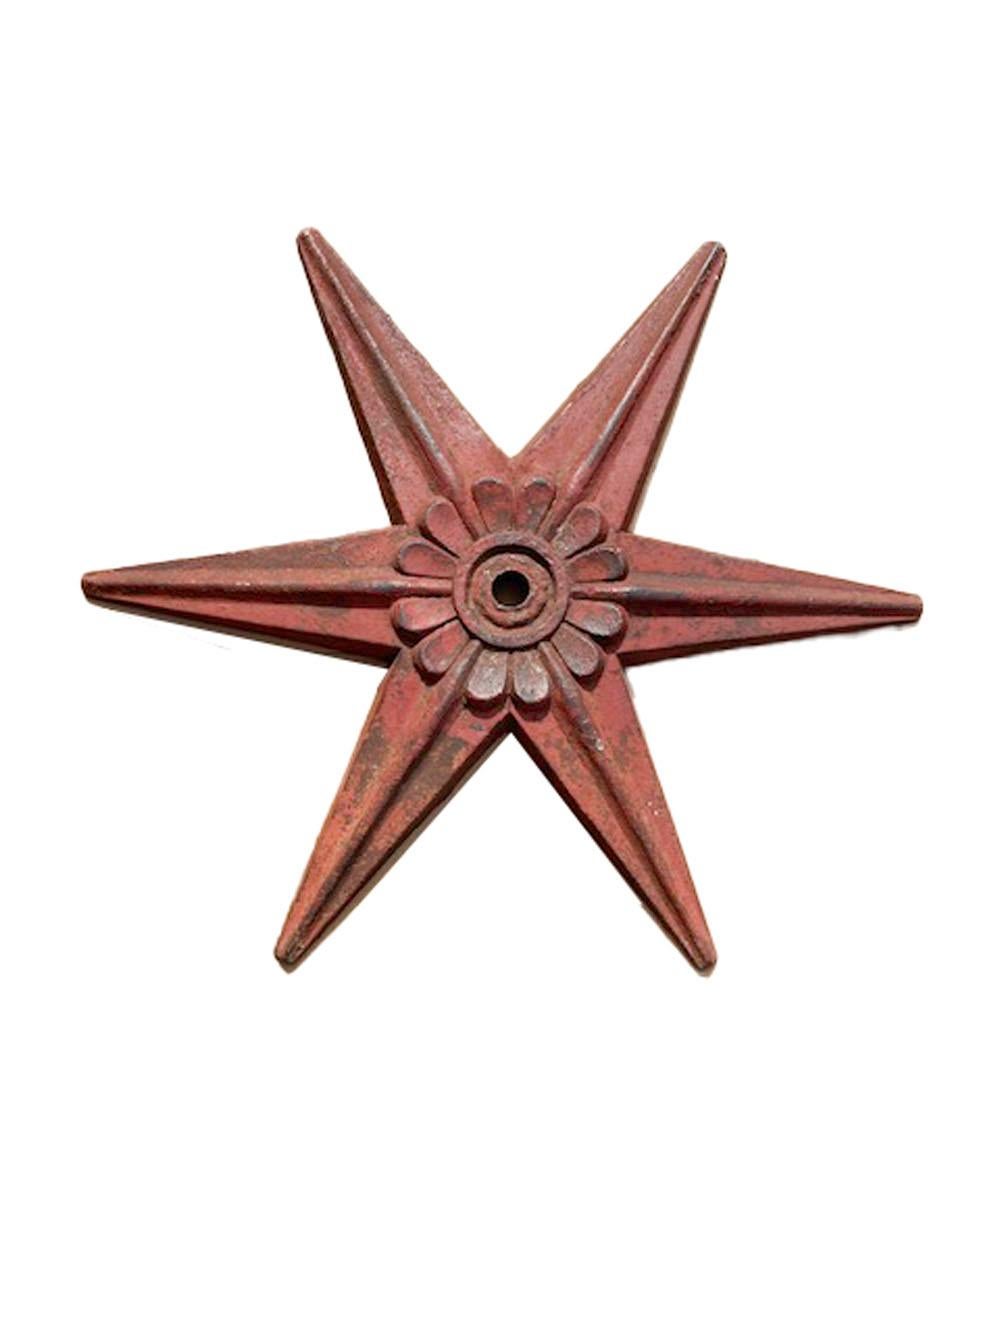 Victorian 28 Inch Cast Iron Building Anchor of 6 Pointed Star Form with Sunflower Center